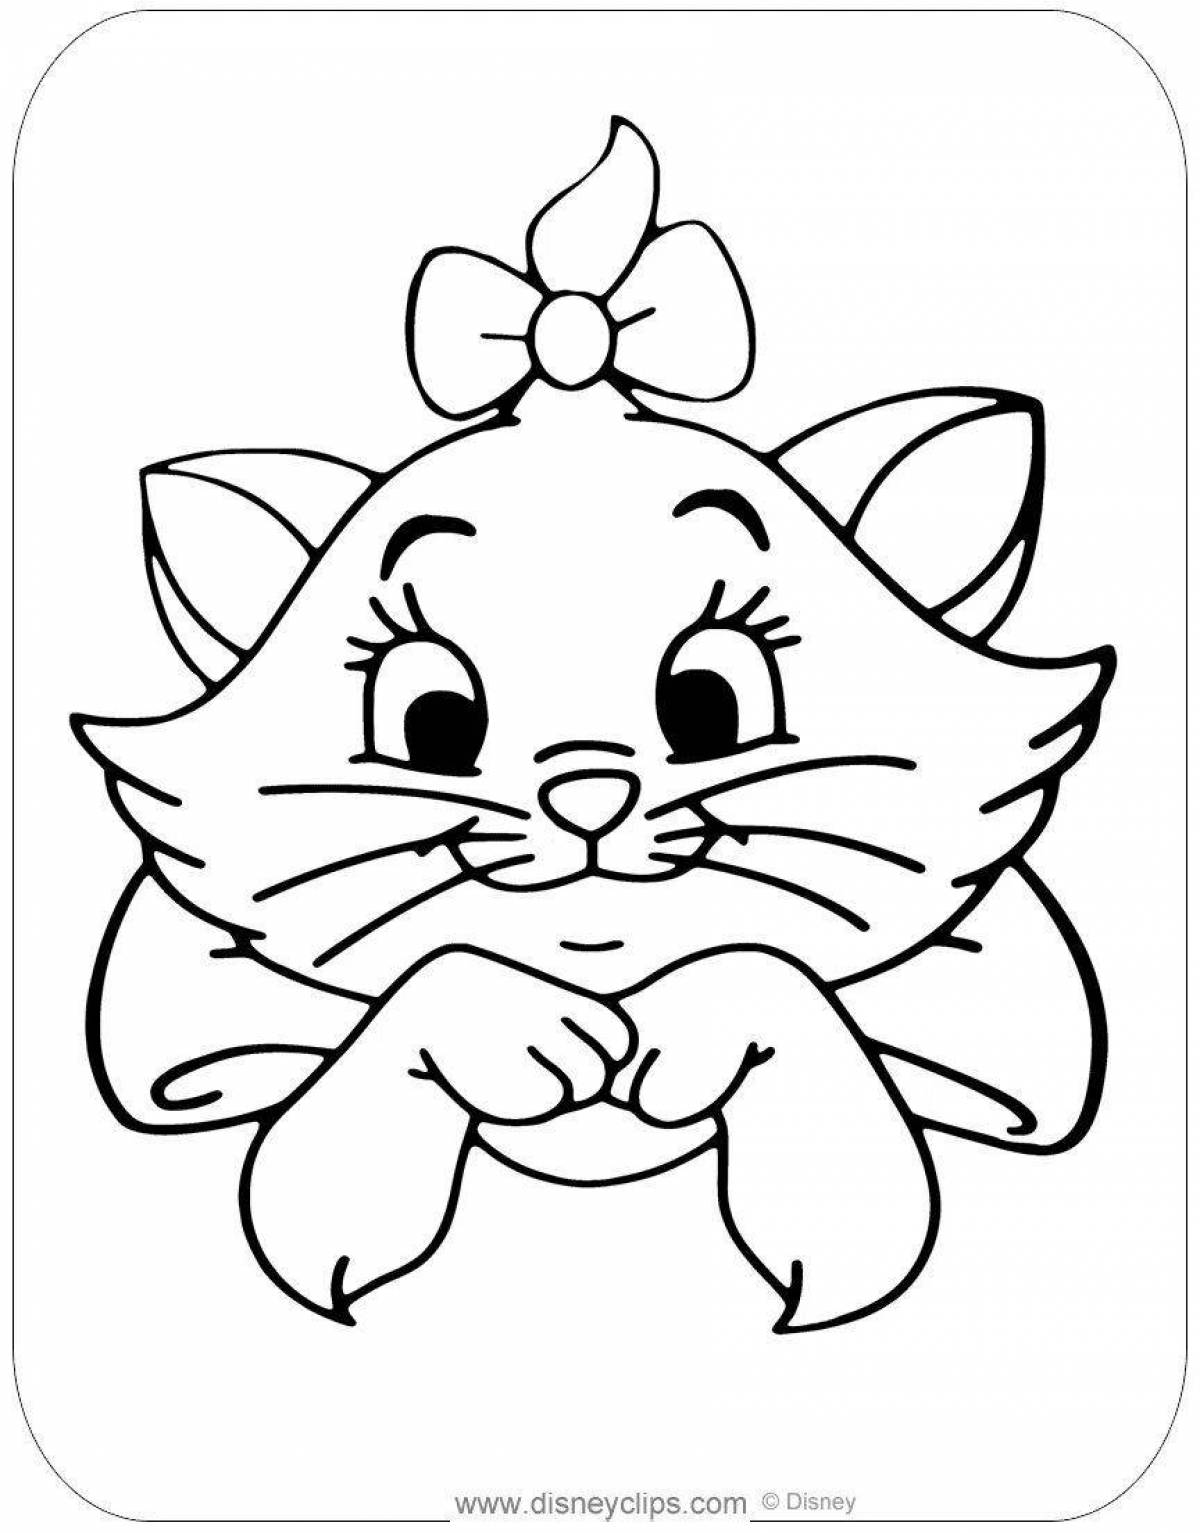 Coloring page cute cat with a bow